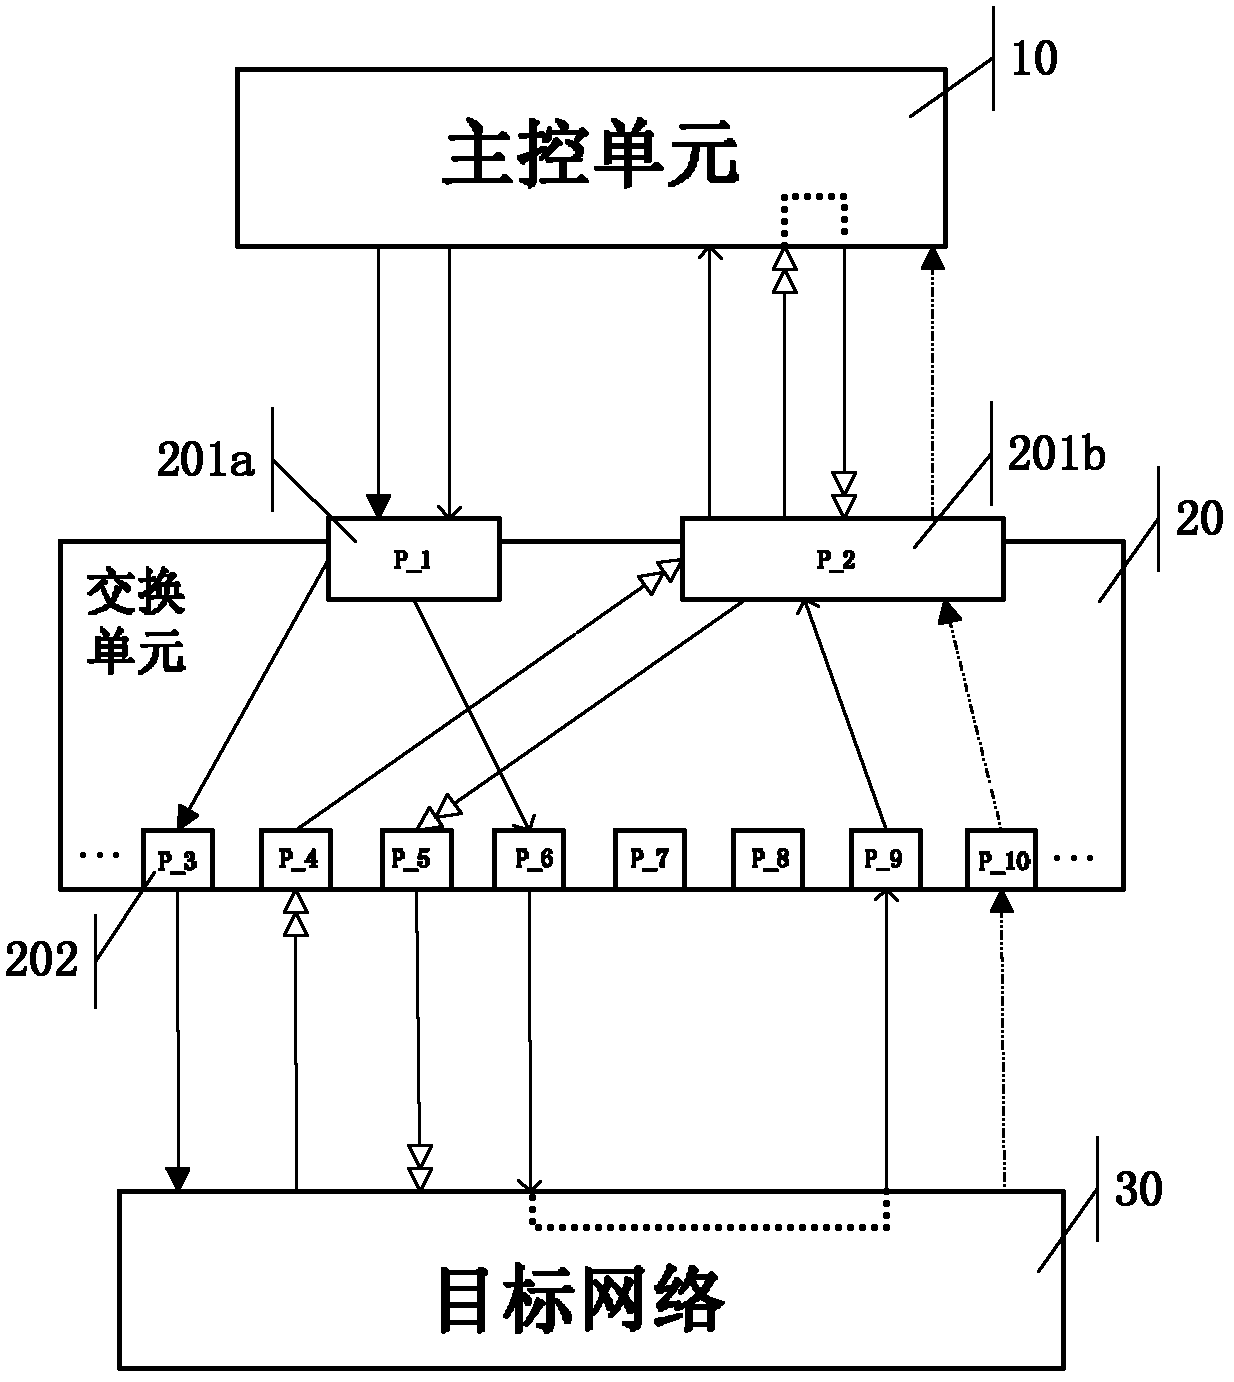 Network area traffic compressing and distributing system based on virtual link exchange